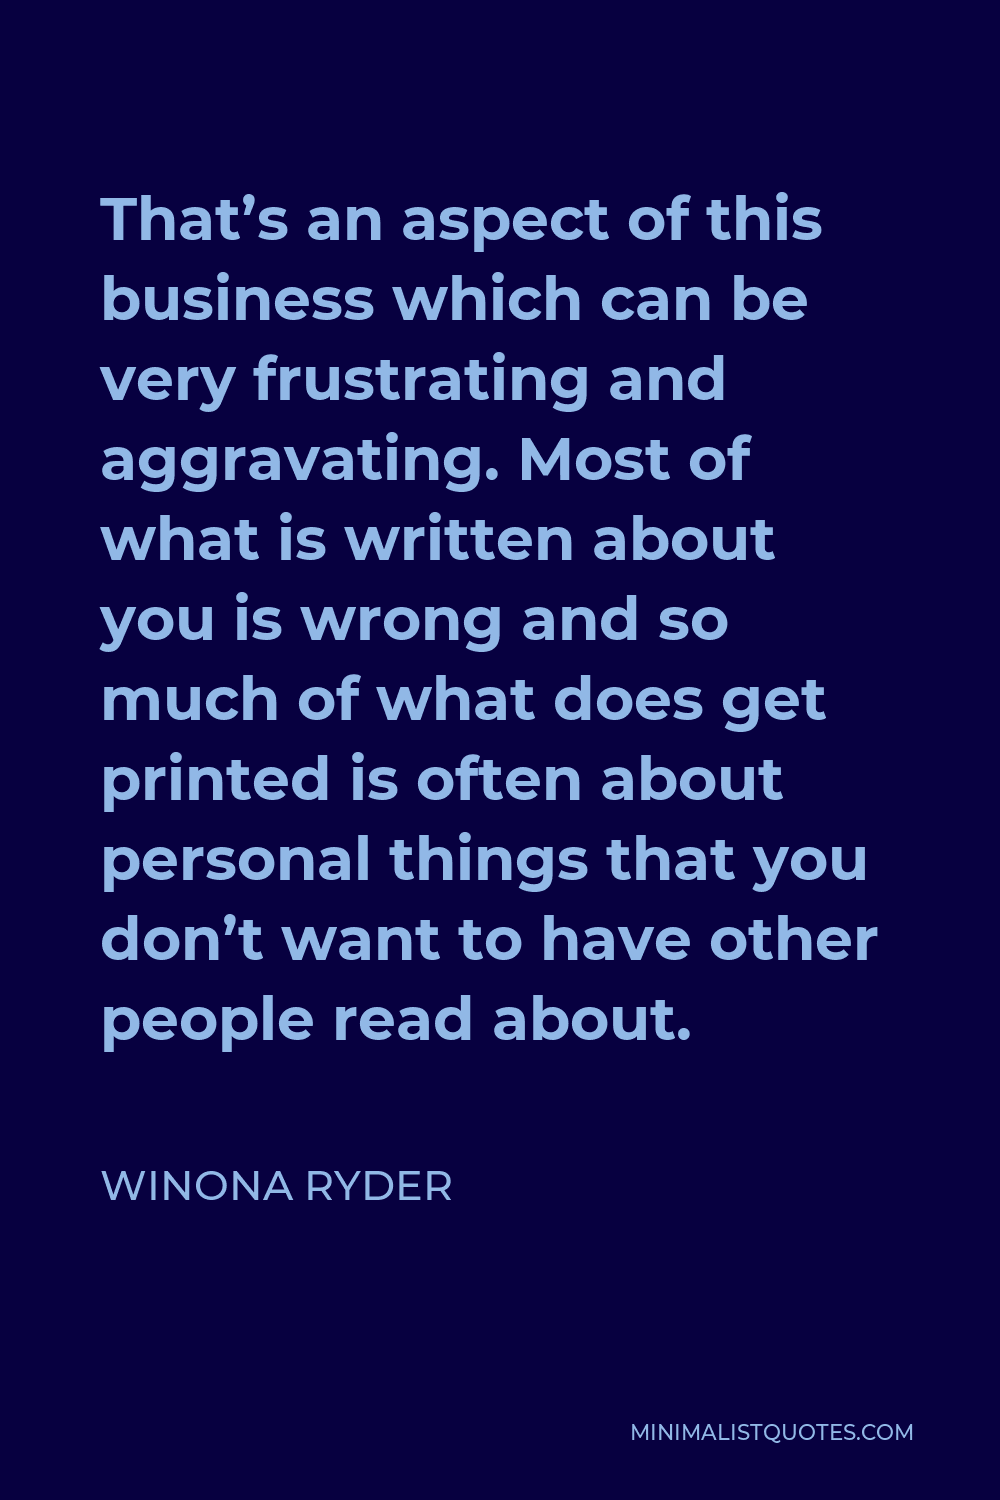 Winona Ryder Quote - That’s an aspect of this business which can be very frustrating and aggravating. Most of what is written about you is wrong and so much of what does get printed is often about personal things that you don’t want to have other people read about.